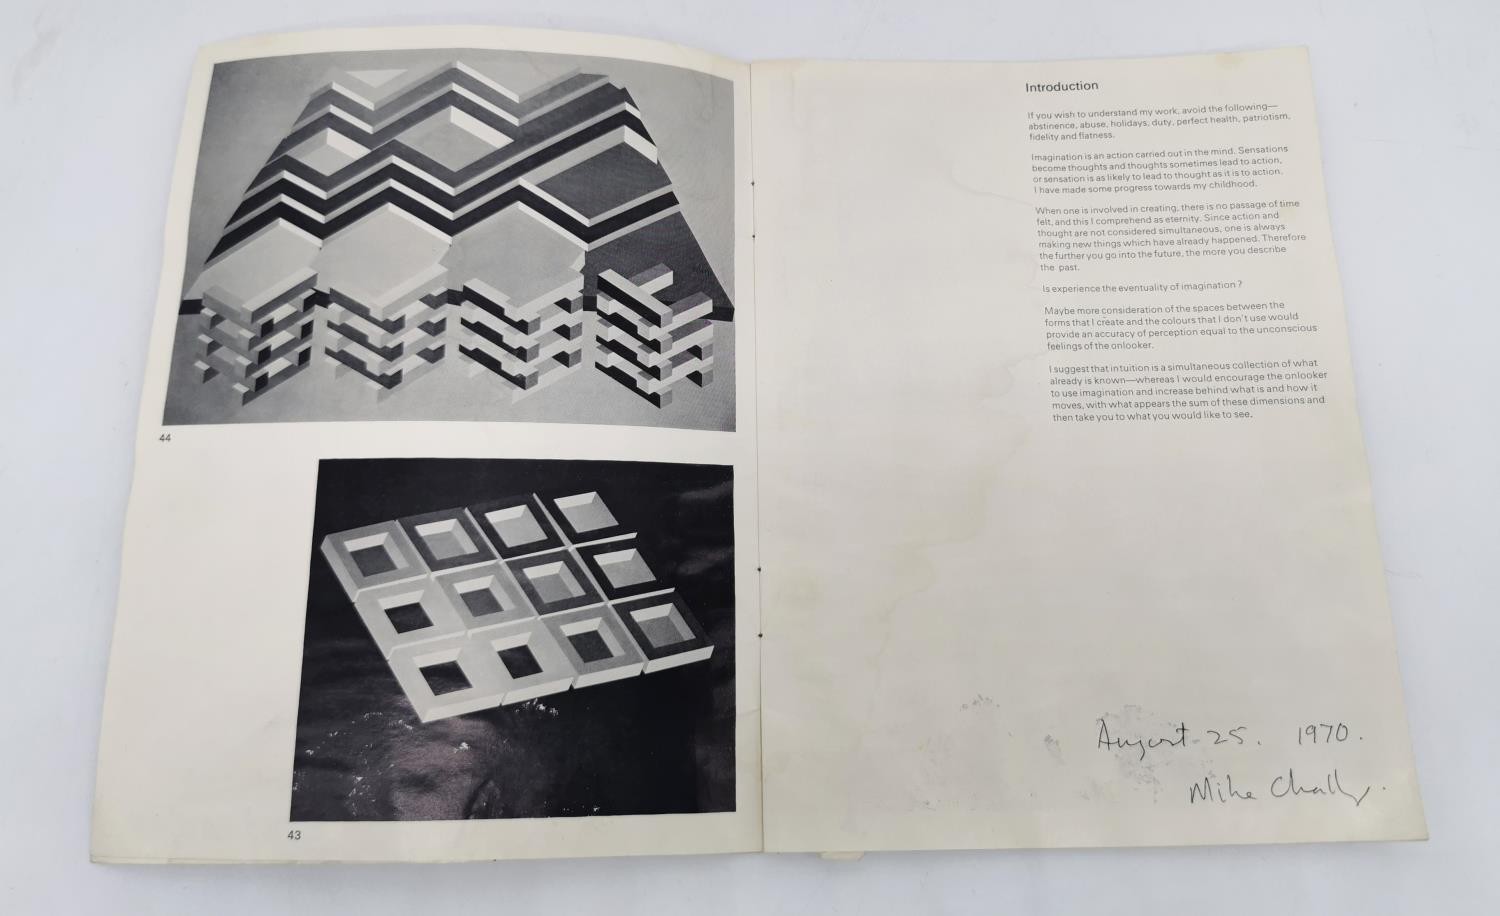 Michael Challenger, British (1939-), 'Vexations', screen-print of an optical illusion. Signed and - Image 9 of 11